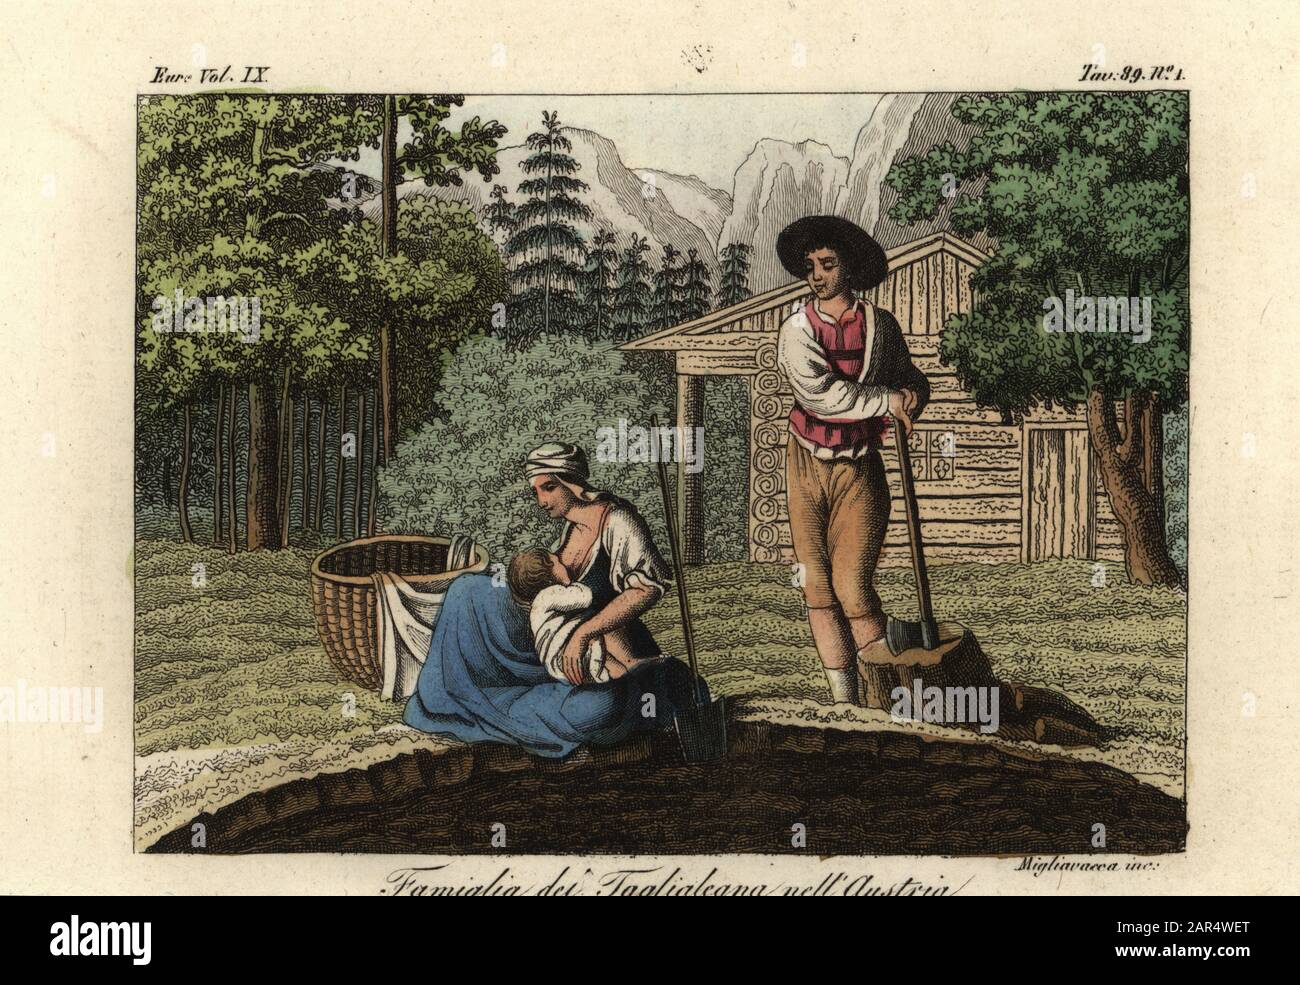 Family of woodcutters in Austria, 1822. The man stands with an axe, while his wife breastfeeds a child near a well. Familia dei Taalialeana nell’Austria. Taken from Alexandre de Laborde’s Voyage pittoresque en Autriche, 1822. Handcoloured copperplate engraving by Migliavacca from Giulio Ferrario’s Costumes Ancient and Modern of the Peoples of the World, Il Costume Antico e Moderno, Florence, 1844. Stock Photo